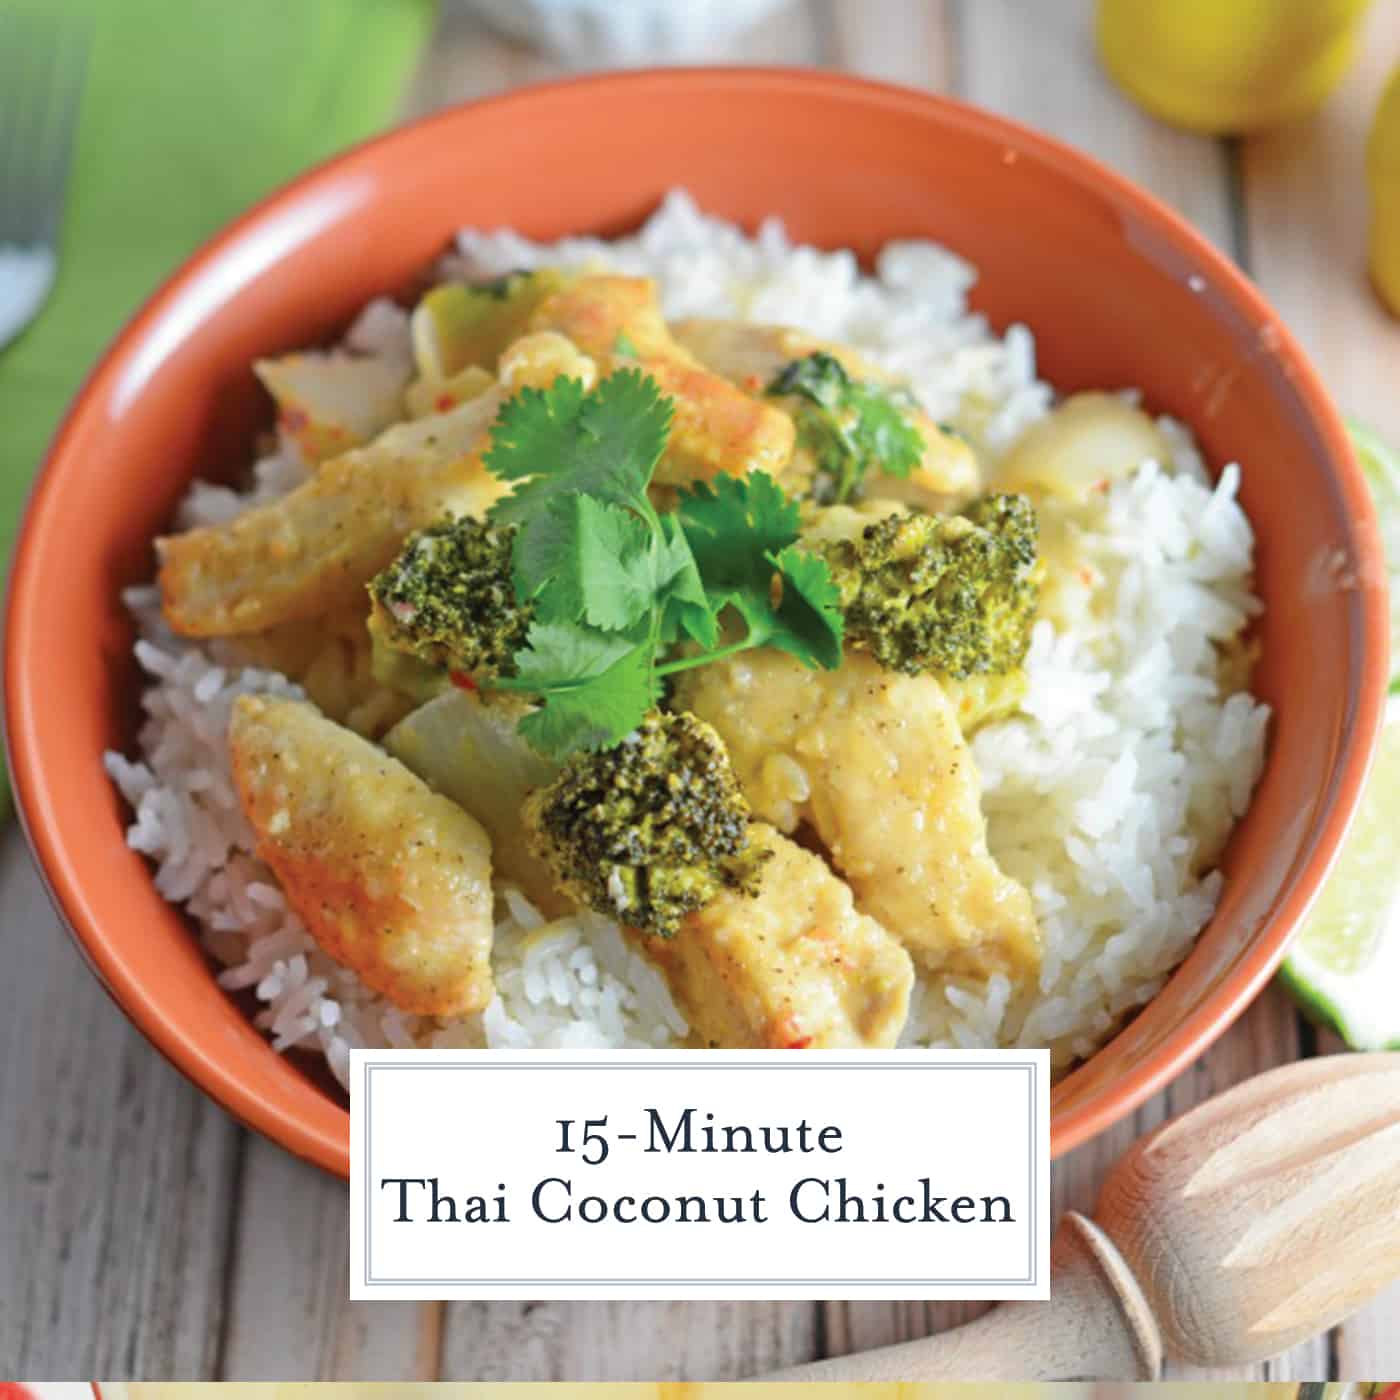 Thai Coconut Chicken is a easy dinner recipe made with coconut milk, broccoli, ginger and more flavorful spices. Dinner is ready in just 20 minutes! #thaichicken #30minutemeals #easychickenrecipes www.savoryexperiments.com 